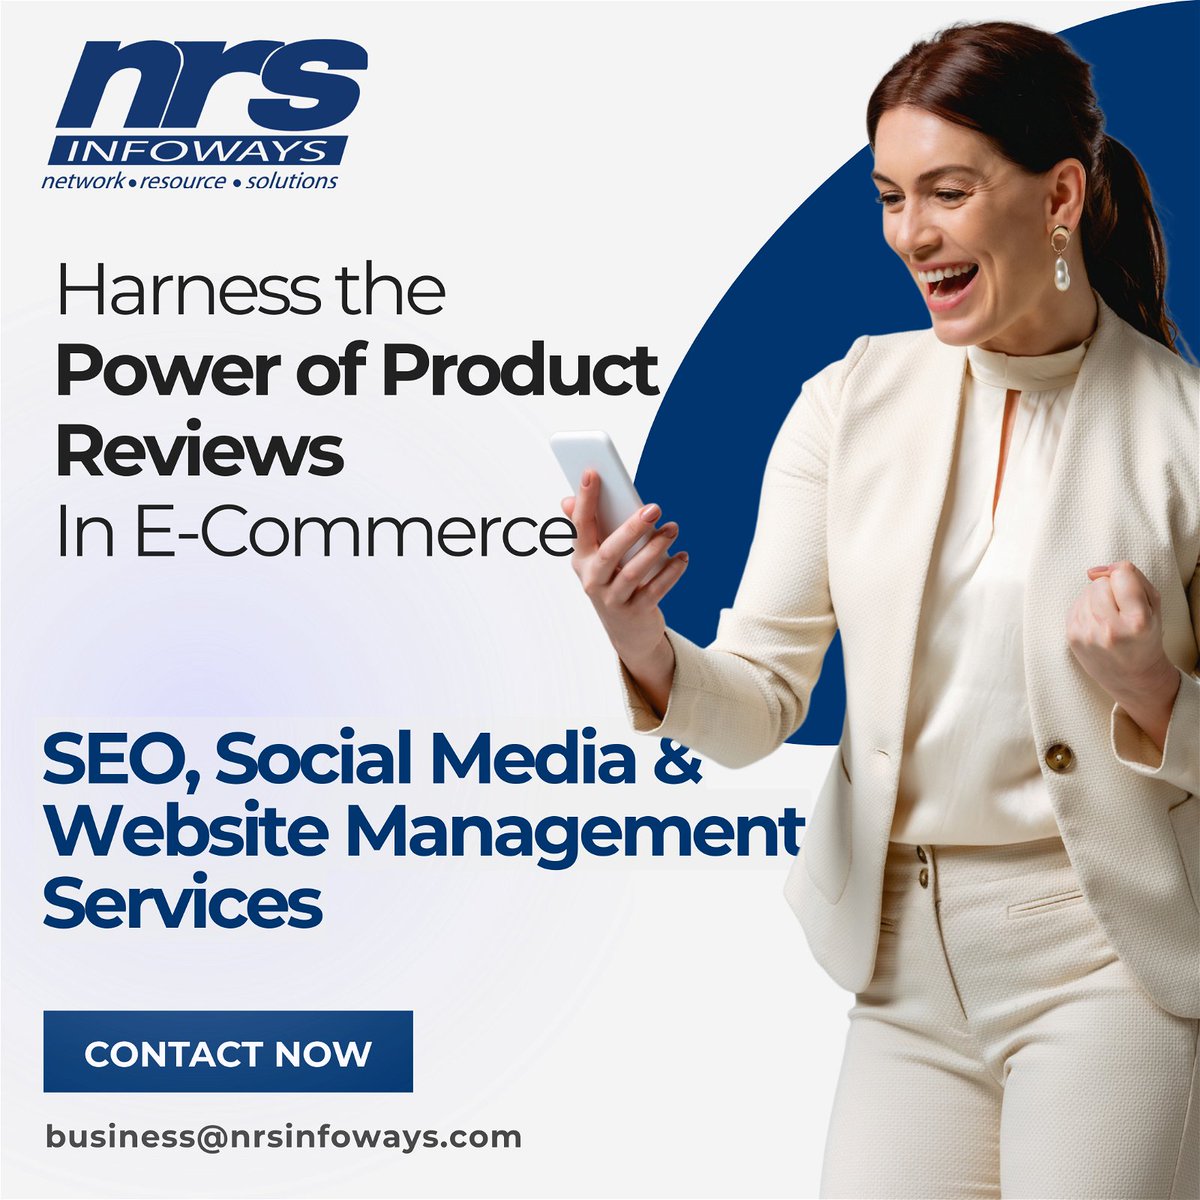 In E-Commerce Harness the Power of Product Reviews

For e-commerce businesses, one significant way to optimize for SEO is by product reviews.

We can help
Lets discuss business@nrsinfoways.com
#ecommerce #productreviews #seooptimization #usergeneratedcontent #seo #nrsinfoways